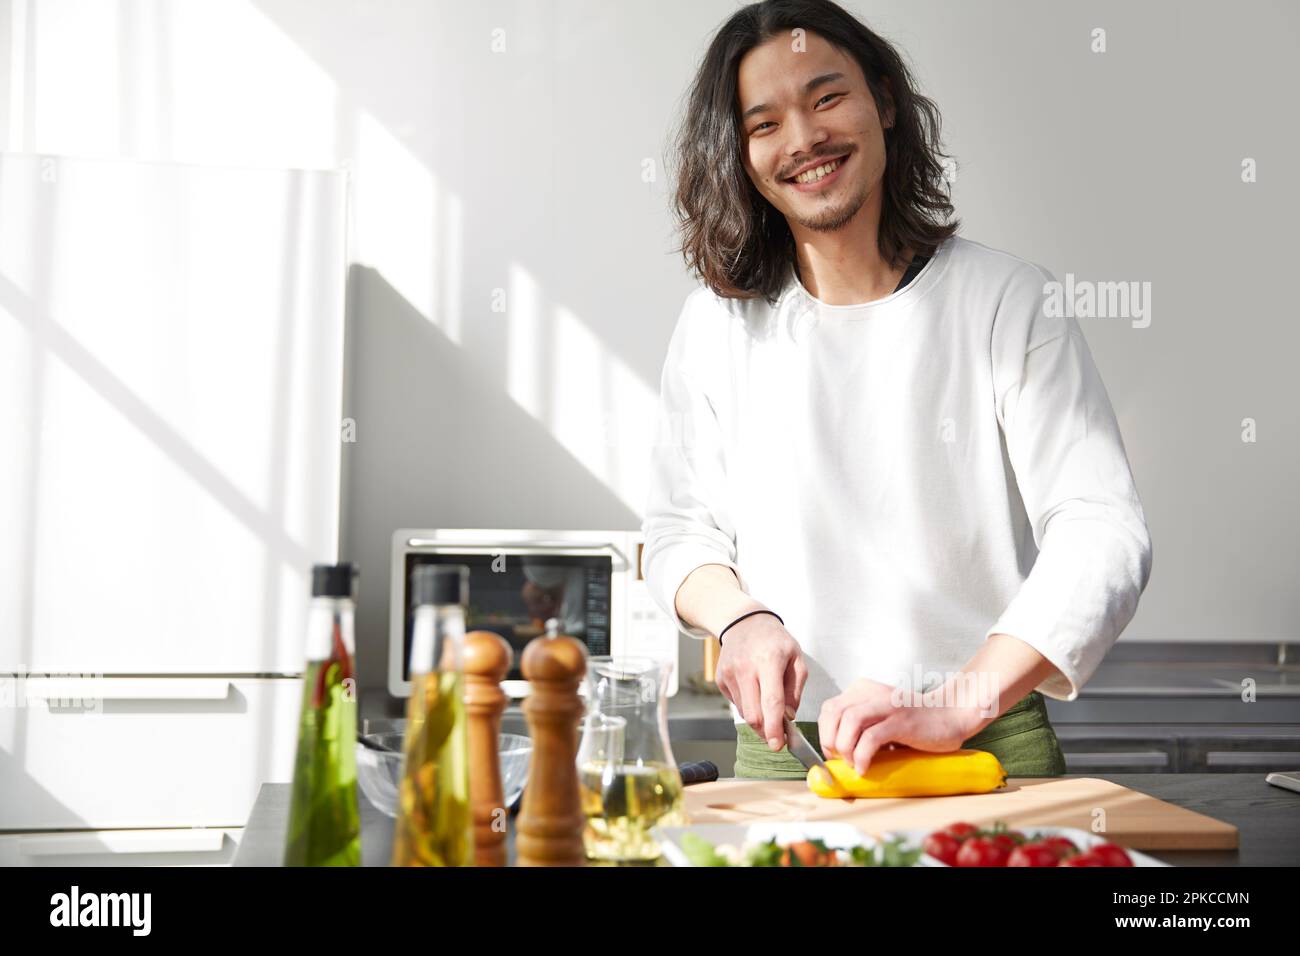 Smiling Man Cutting Vegetables In Kitchen Stock Photo